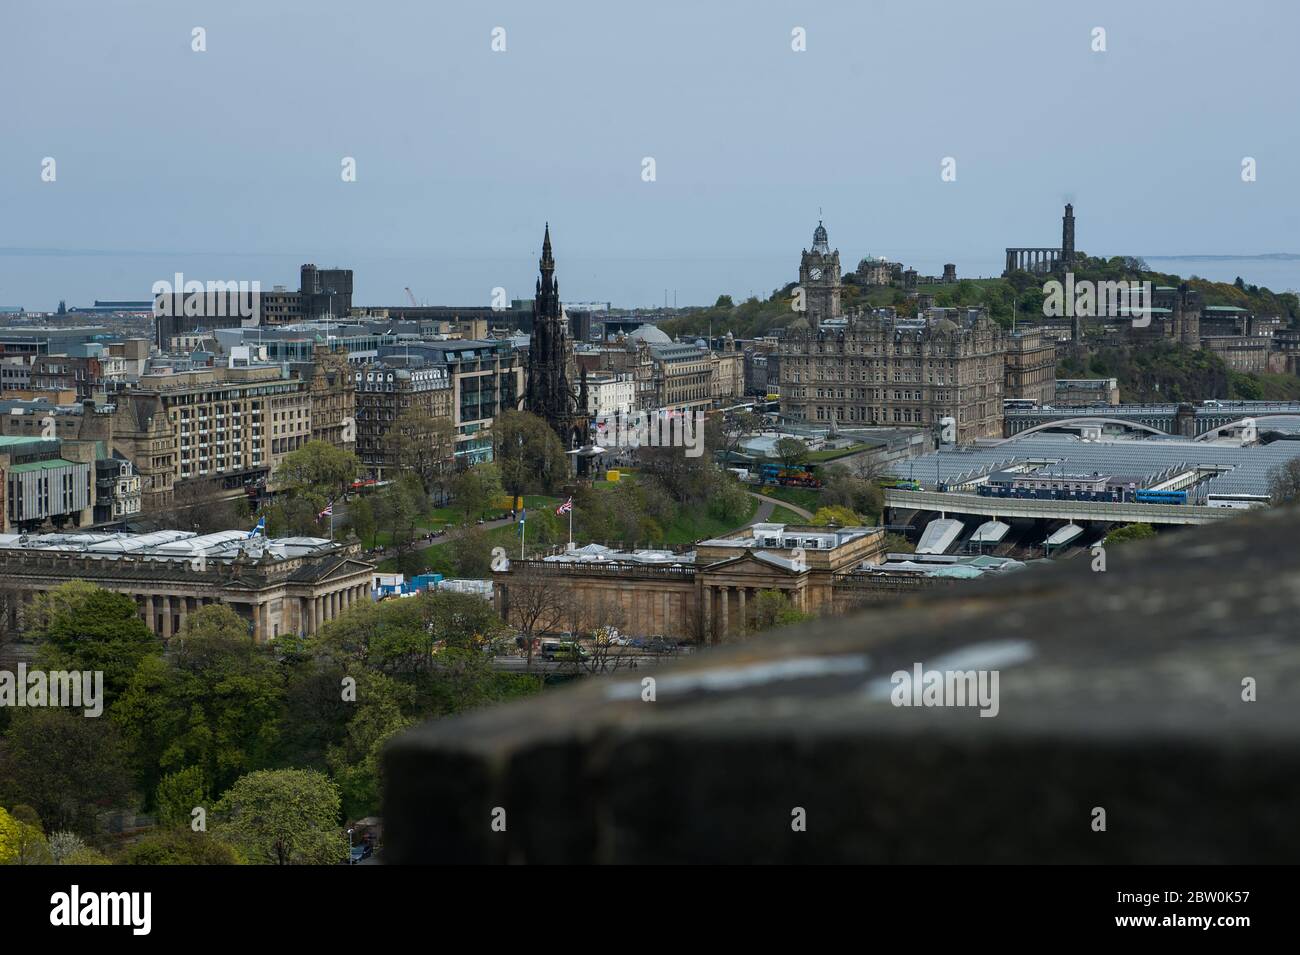 EDINBURGH'S VIEW FROM THE CASTLE Stock Photo